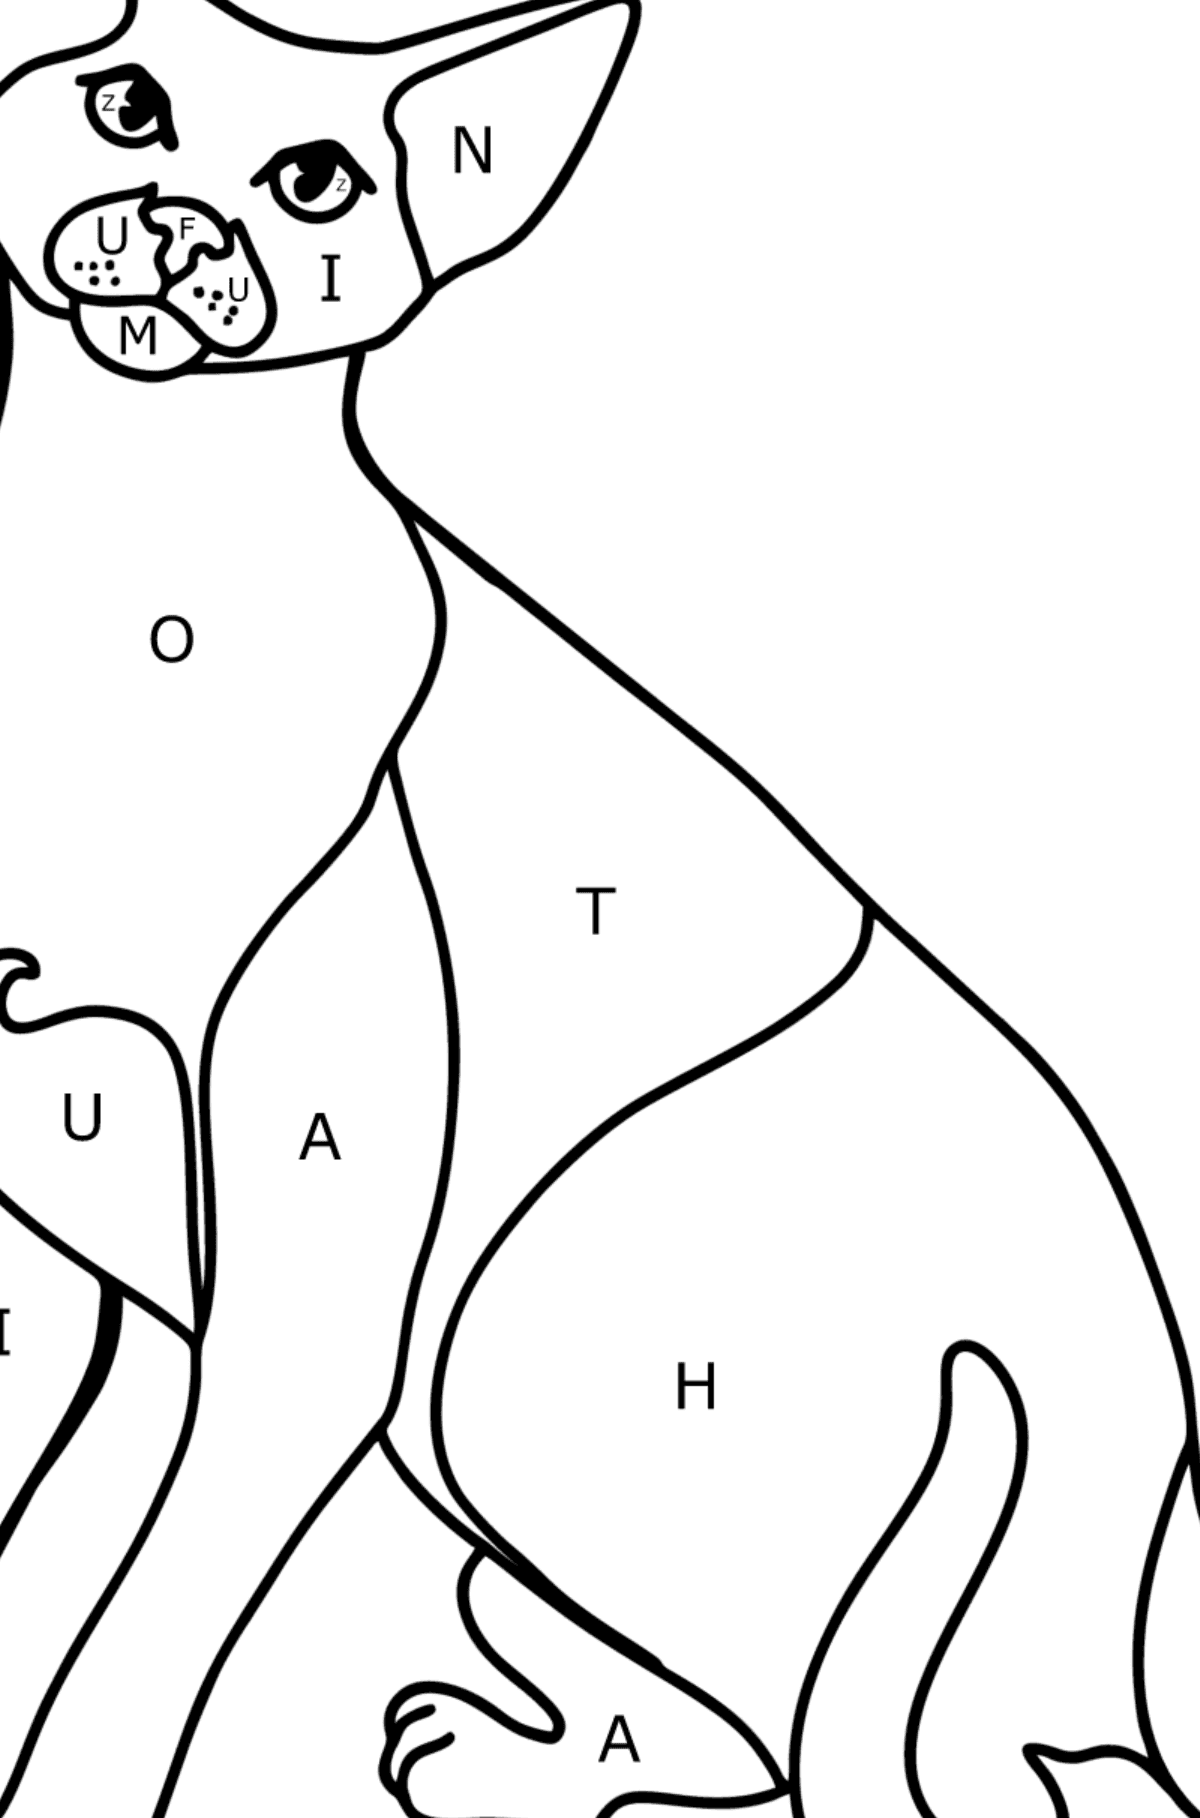 Oriental Shorthair Cat coloring page - Coloring by Letters for Kids